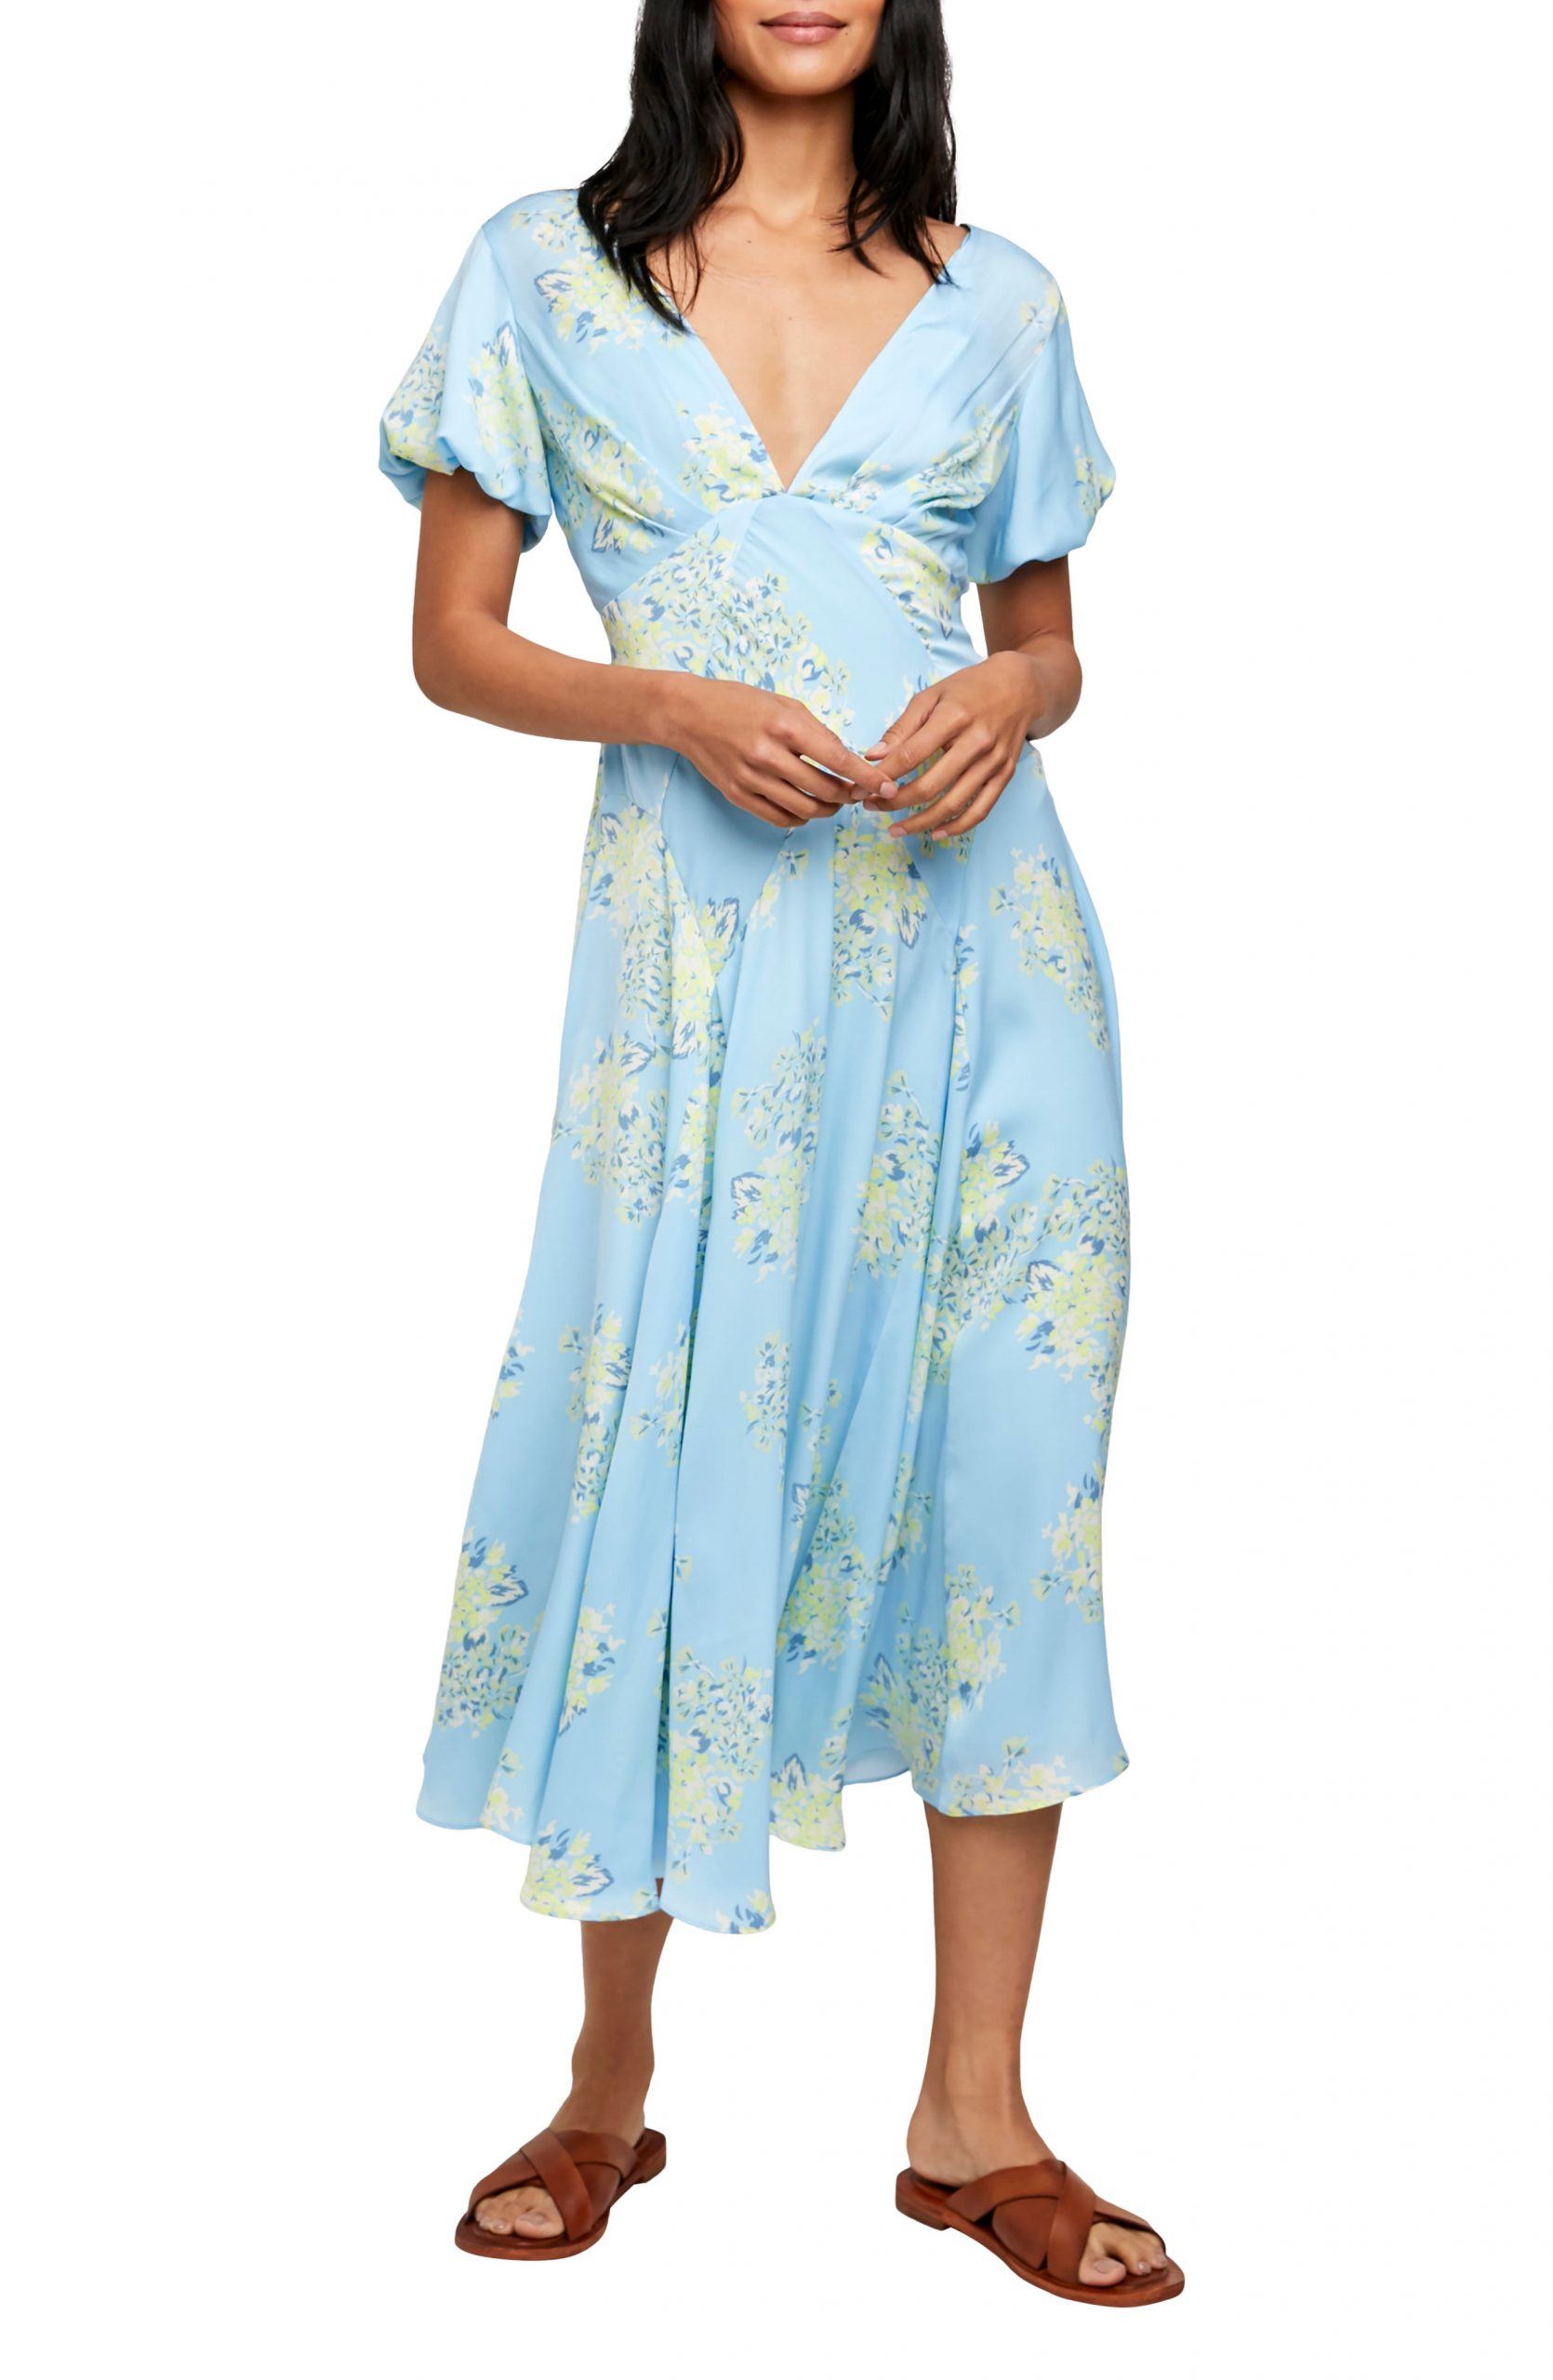 People Laura Floral Maxi Dress, Size ...